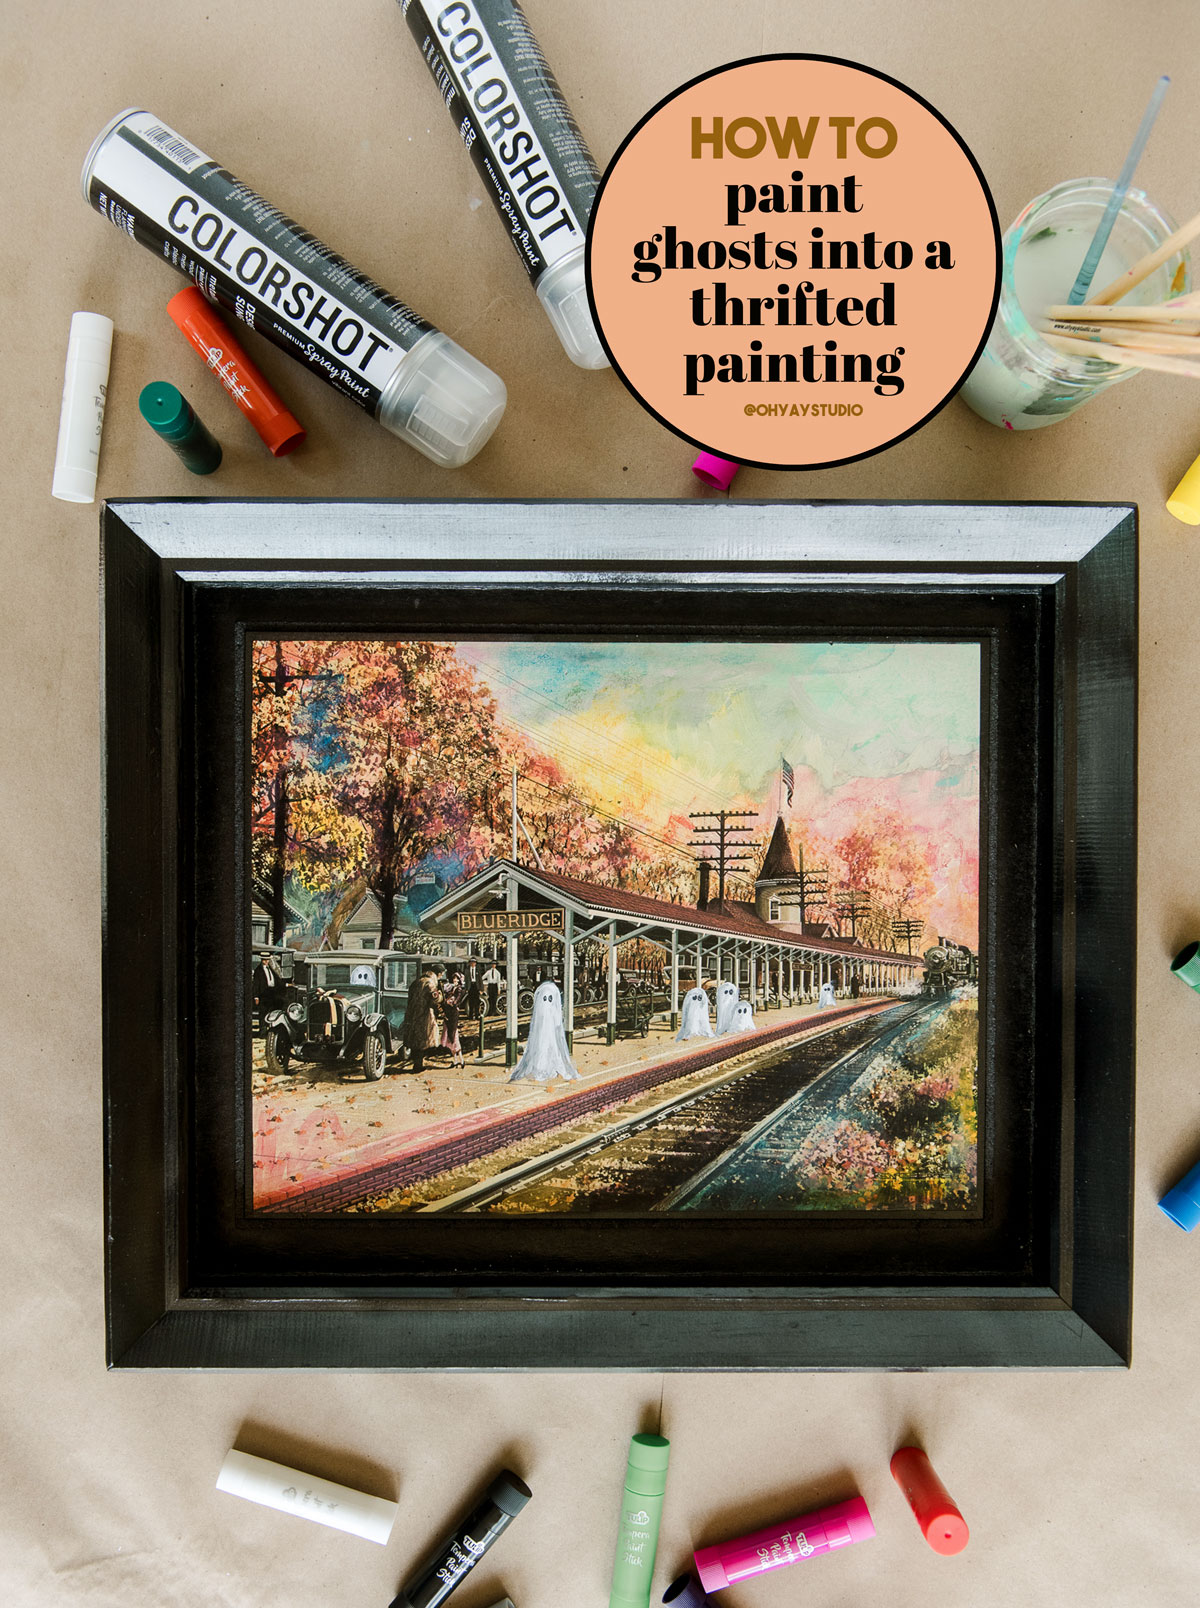 How to paint ghosts into a painting, thrifted ghost painting, viral painting ideas, how to upcycle a painting, thrifted painting redone, tulip tempera paint sticks, tulip painting ideas, halloween decor, halloween decor ideas